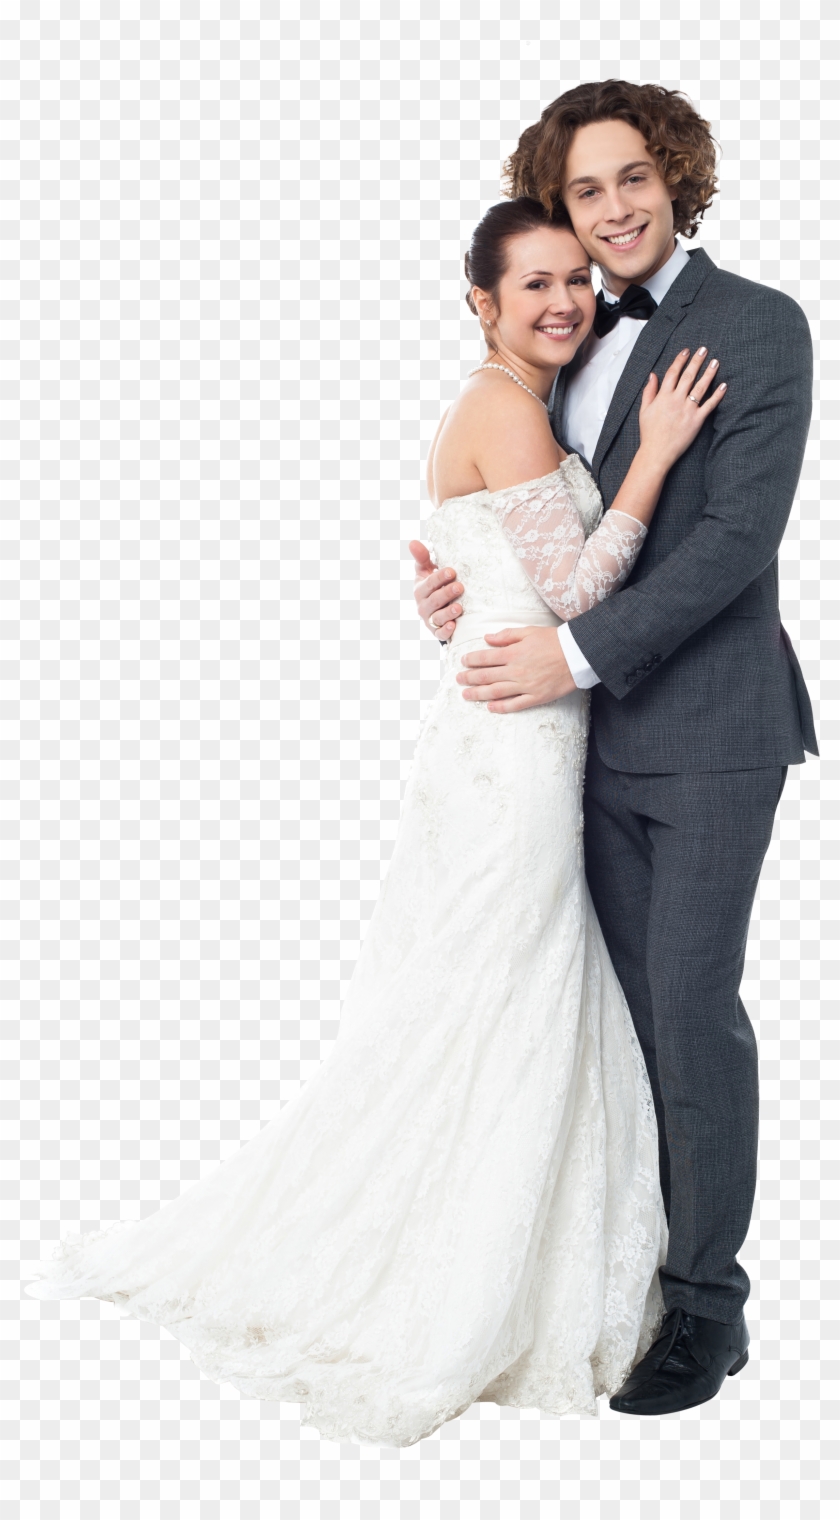 Wedding Couple Png Image - Wedding Couple Png Clipart #1176325